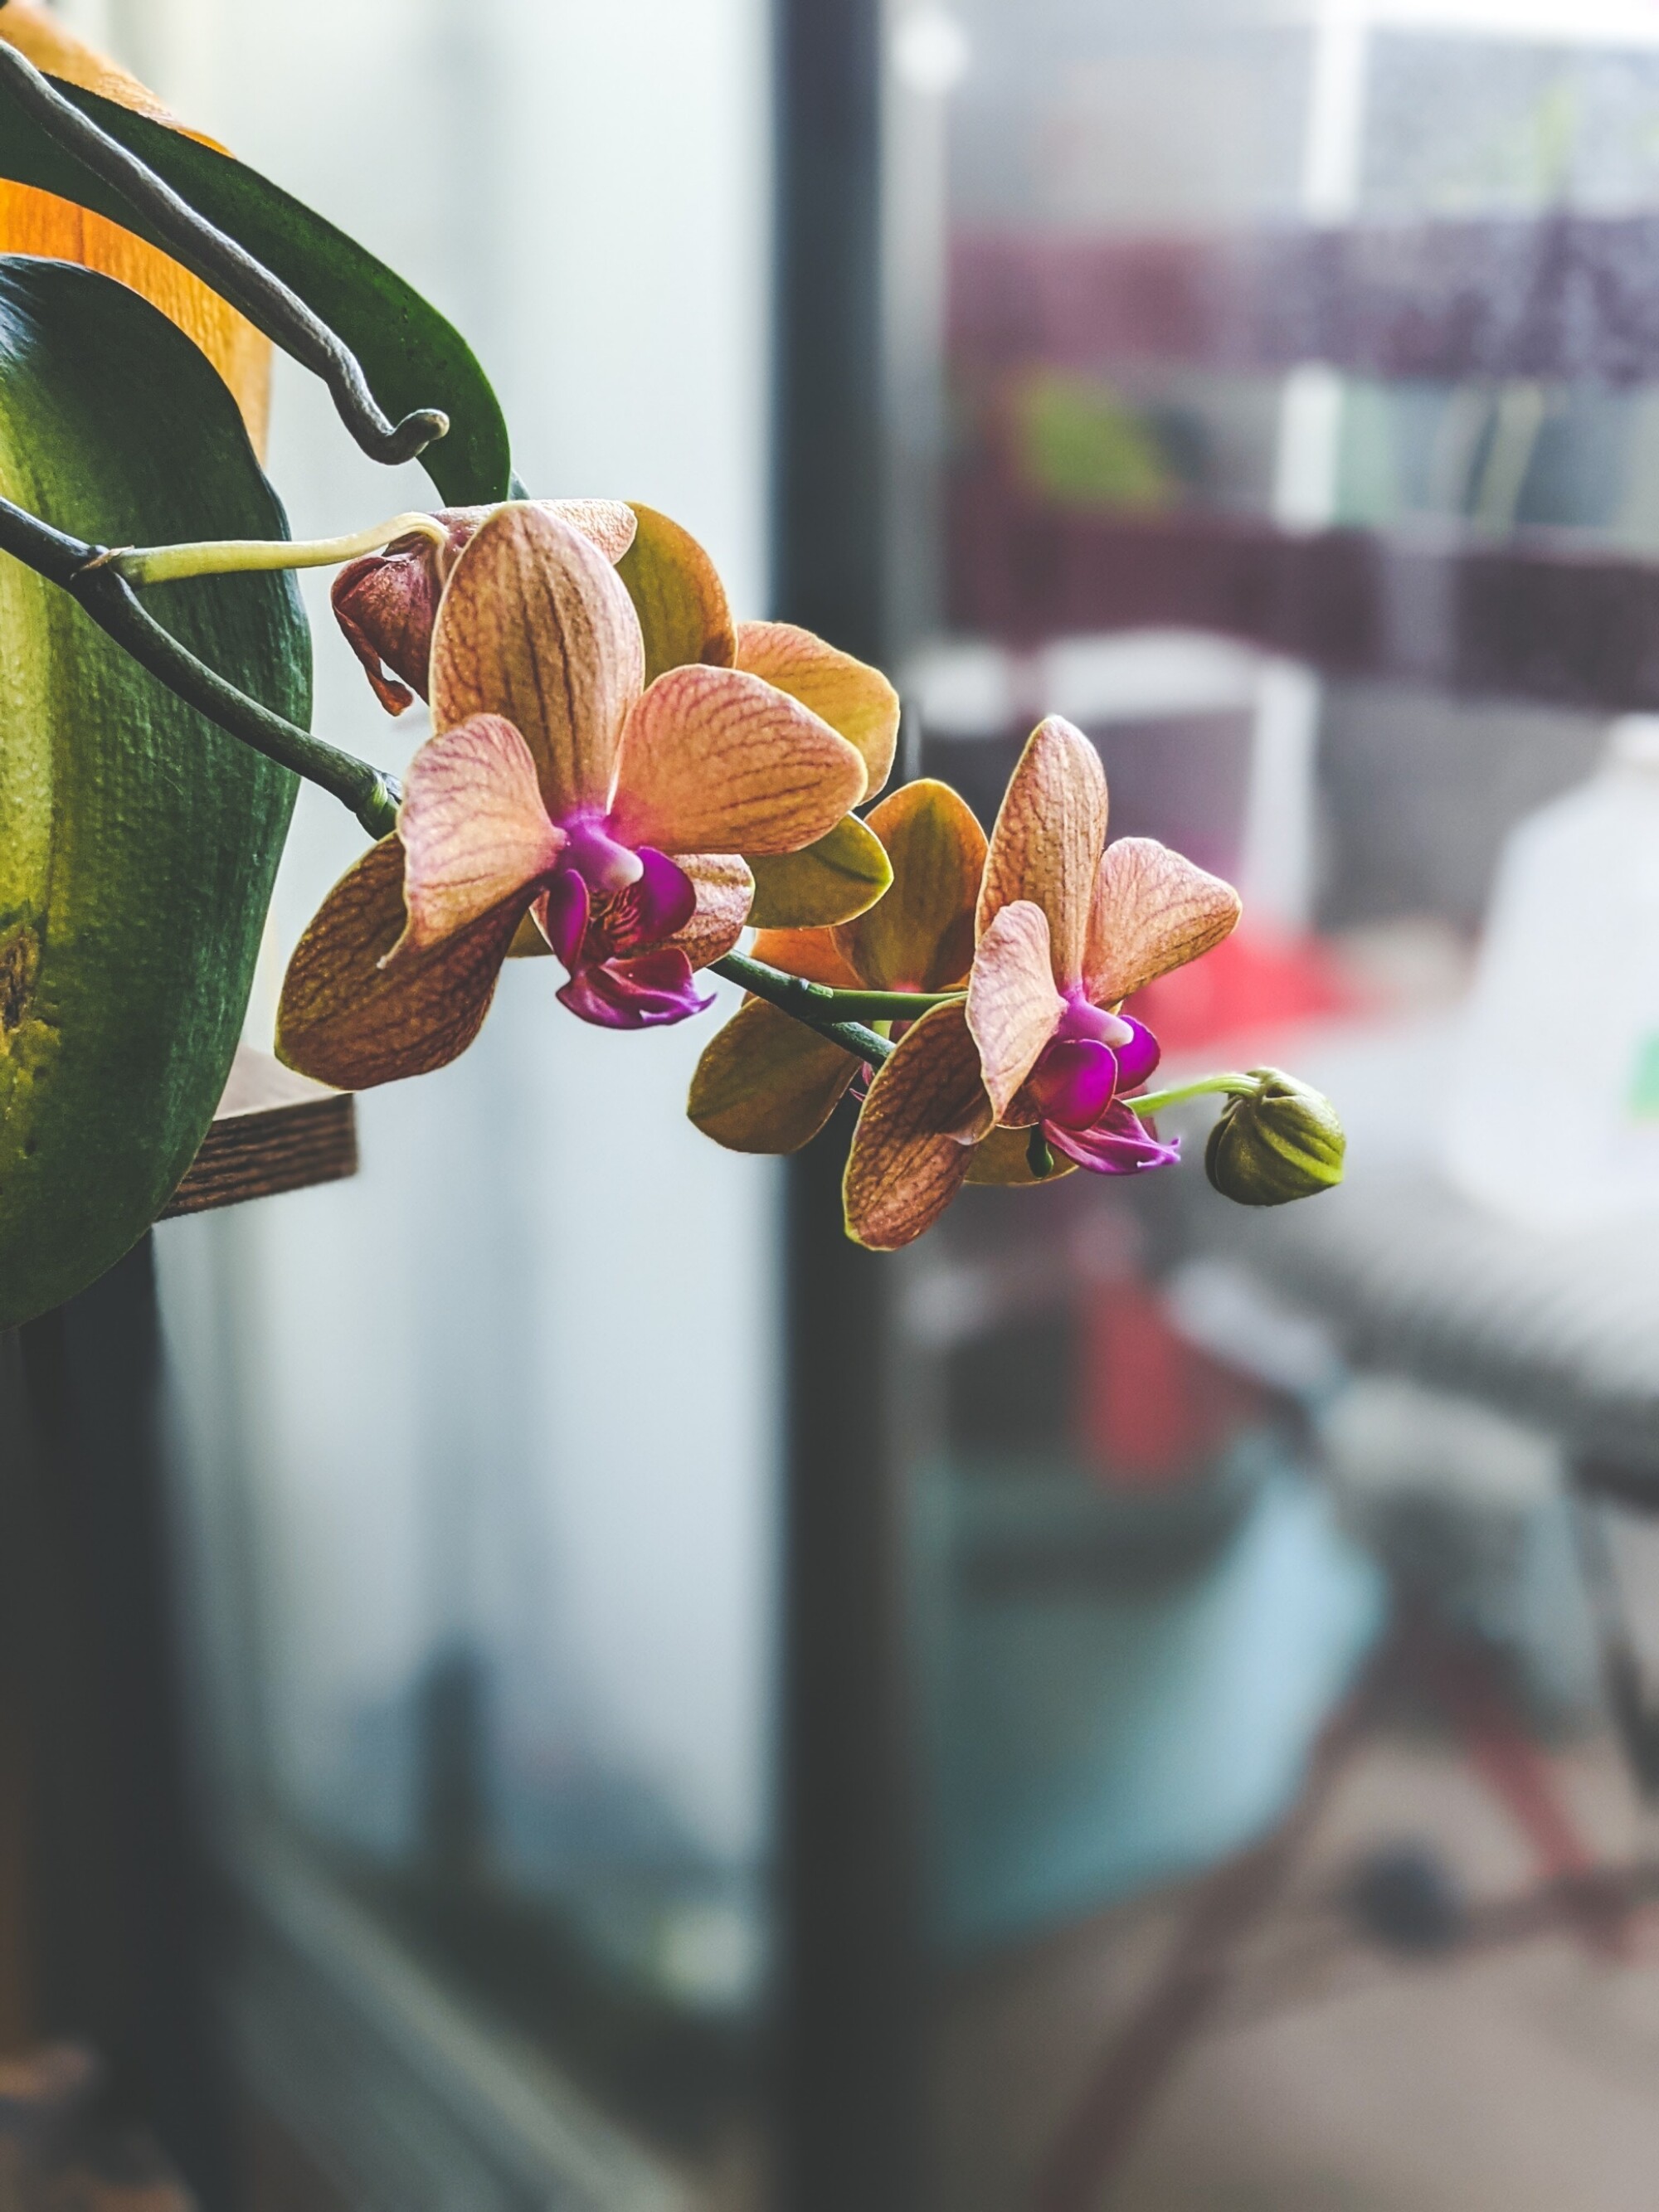 The flower stalk of a Phalaenopsis orchid (aka moth orchid) with apricot-colored blooms and a fuchsia center.